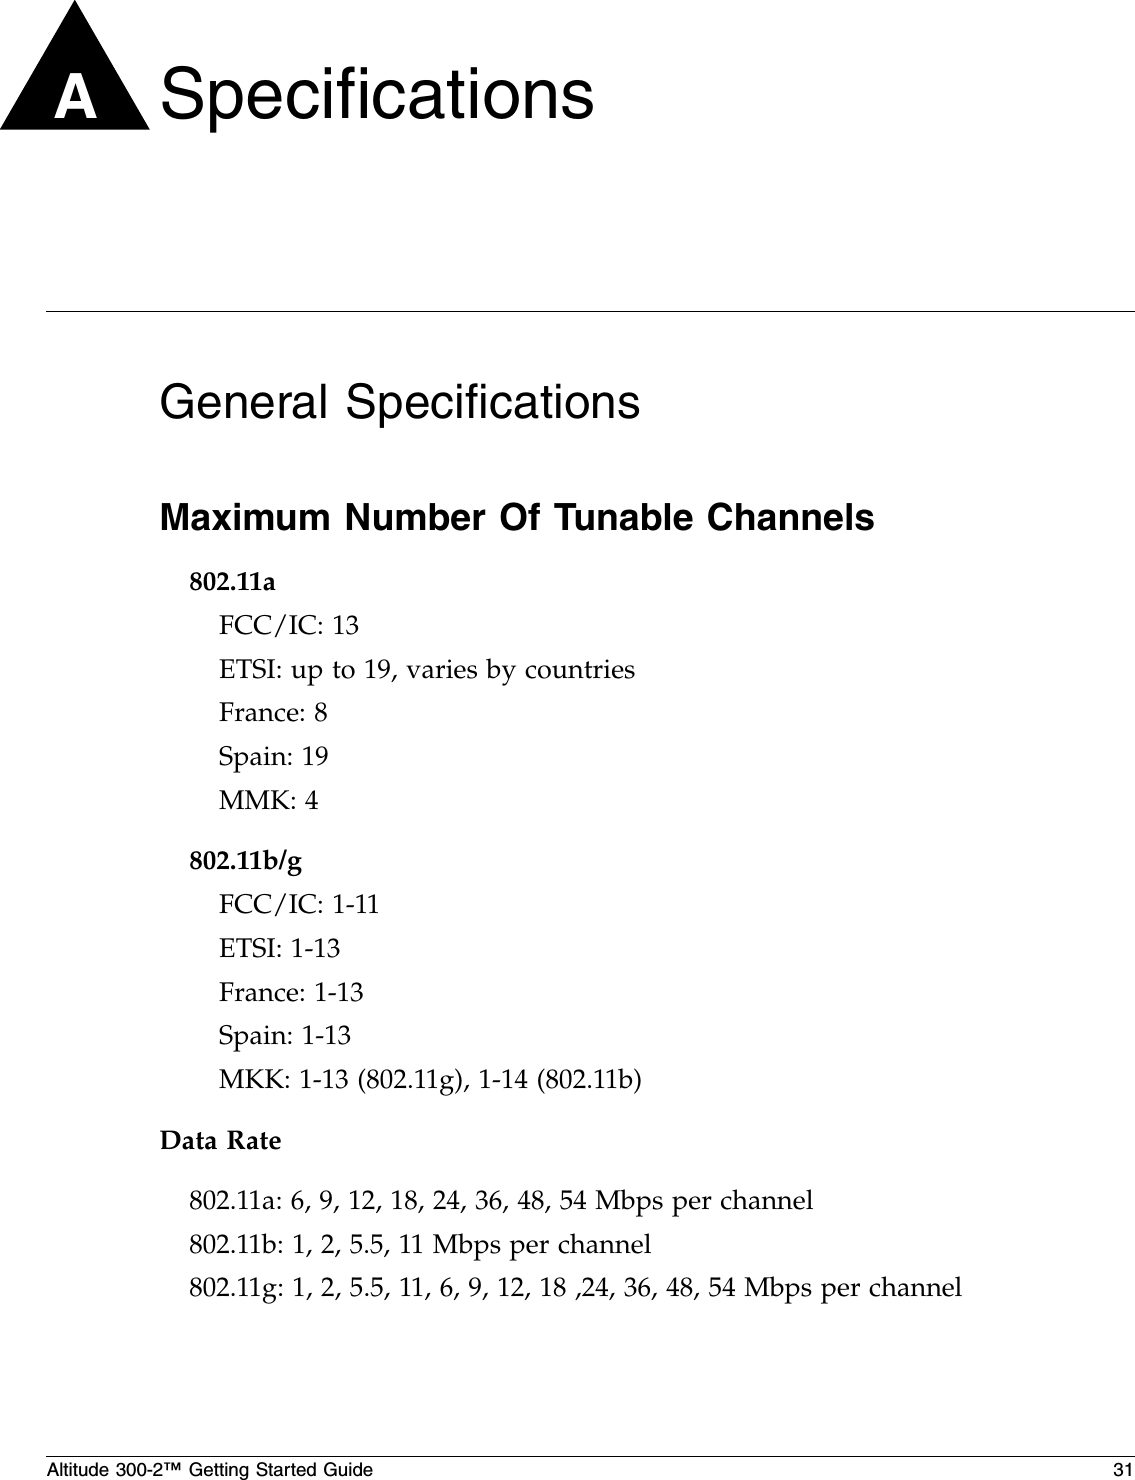 Altitude 300-2™ Getting Started Guide 31ASpecificationsGeneral SpecificationsMaximum Number Of Tunable Channels802.11aFCC/IC: 13 ETSI: up to 19, varies by countriesFrance: 8Spain: 19MMK: 4802.11b/gFCC/IC: 1-11ETSI: 1-13France: 1-13Spain: 1-13MKK: 1-13 (802.11g), 1-14 (802.11b)Data Rate802.11a: 6, 9, 12, 18, 24, 36, 48, 54 Mbps per channel802.11b: 1, 2, 5.5, 11 Mbps per channel802.11g: 1, 2, 5.5, 11, 6, 9, 12, 18 ,24, 36, 48, 54 Mbps per channel